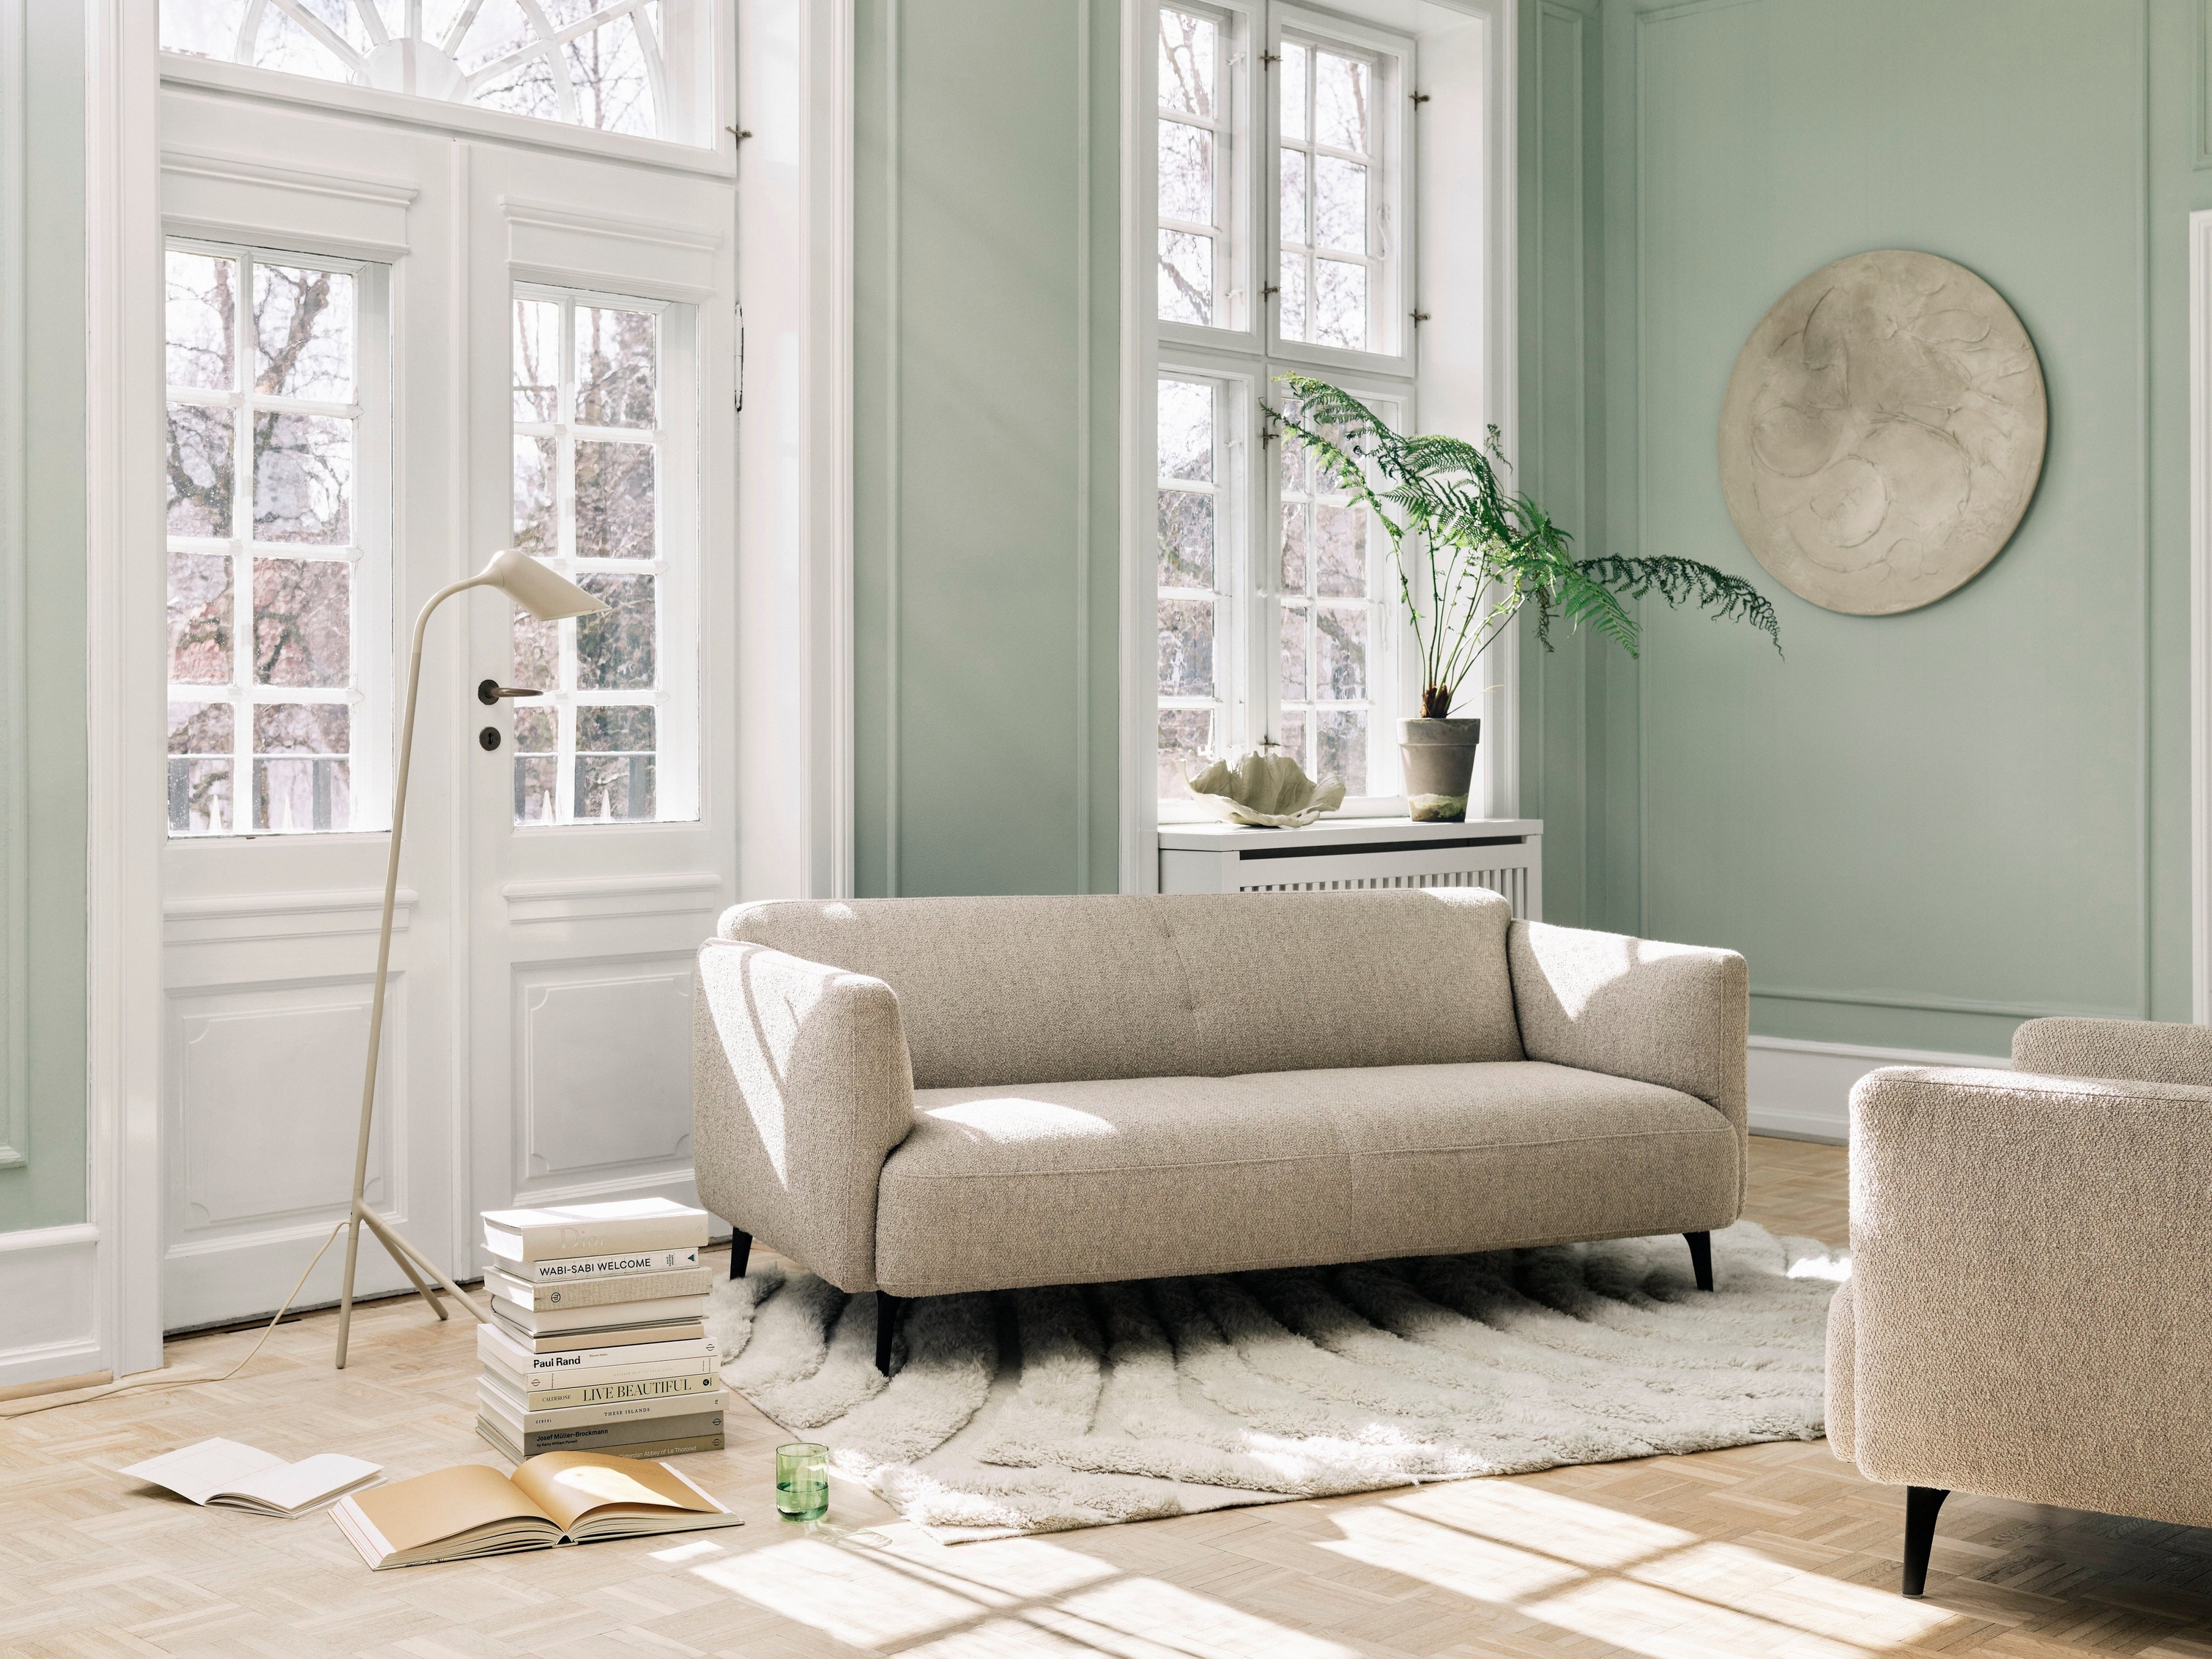 Modern neutral living space featuring the Modena sofa and the Curious floor lamp.